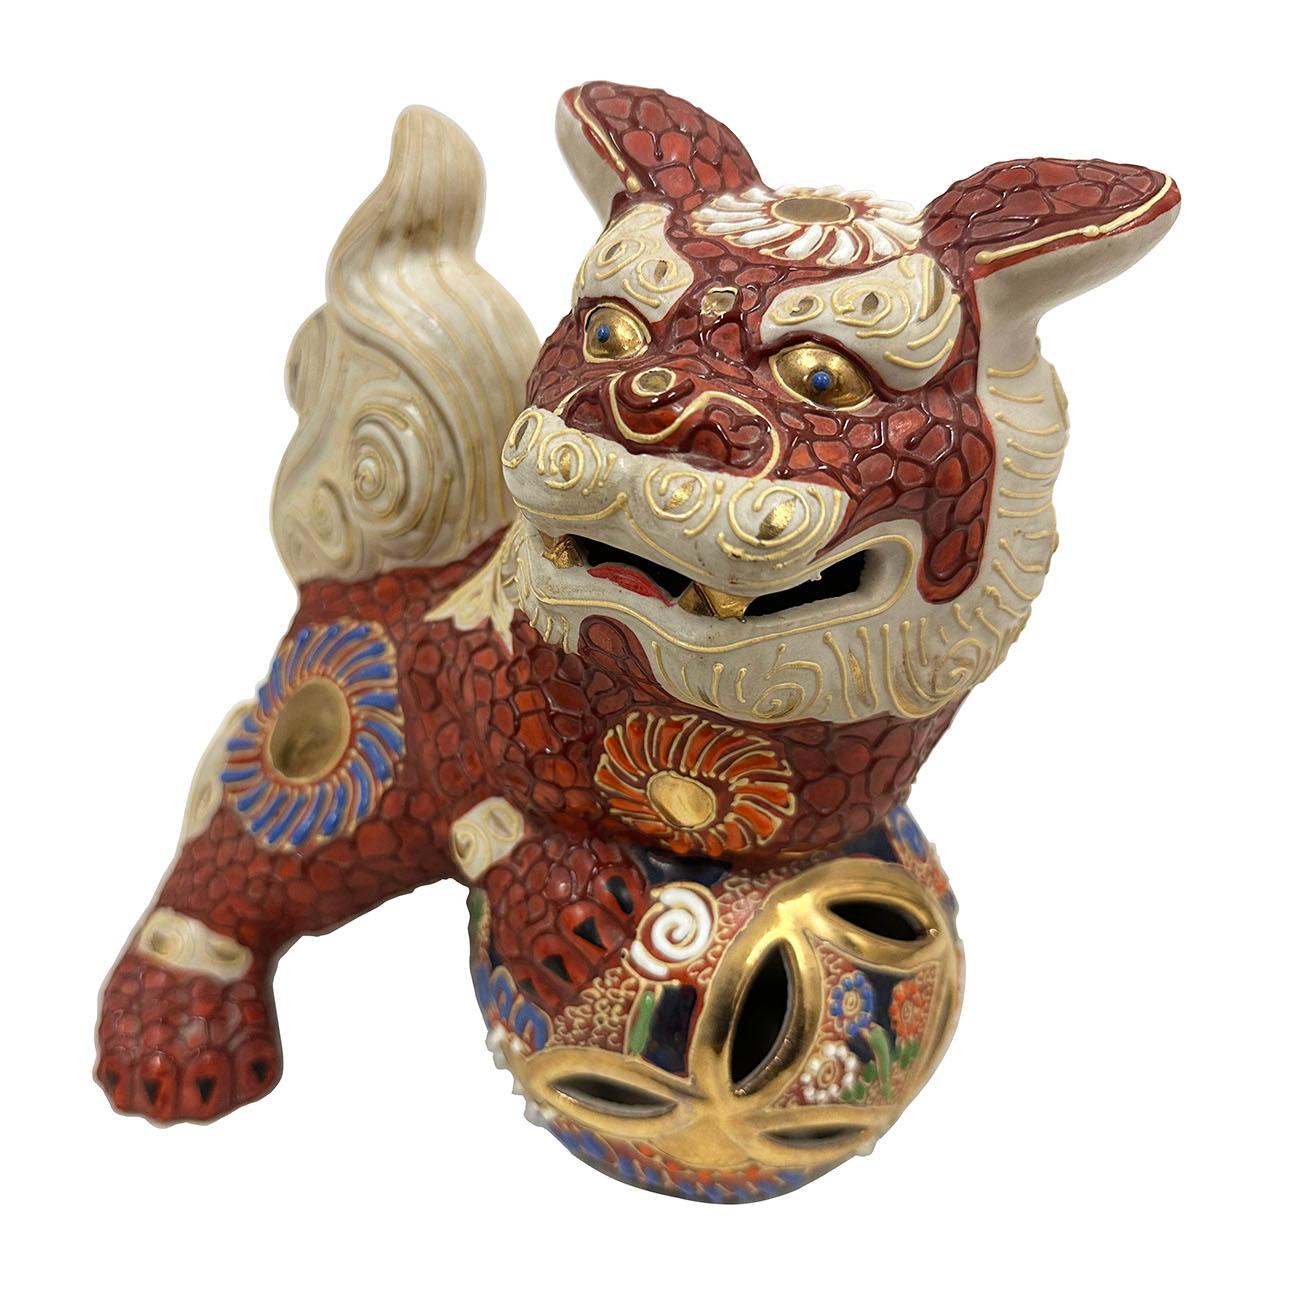 

Fabulous colorful hand painted porcelain foo dogs from Japan feature a ornate decoration on the body with colorful accents and gold detailing. Crafted by Kutani in Japan, the detailed carving works shows this happy foo dog is playing with ball.